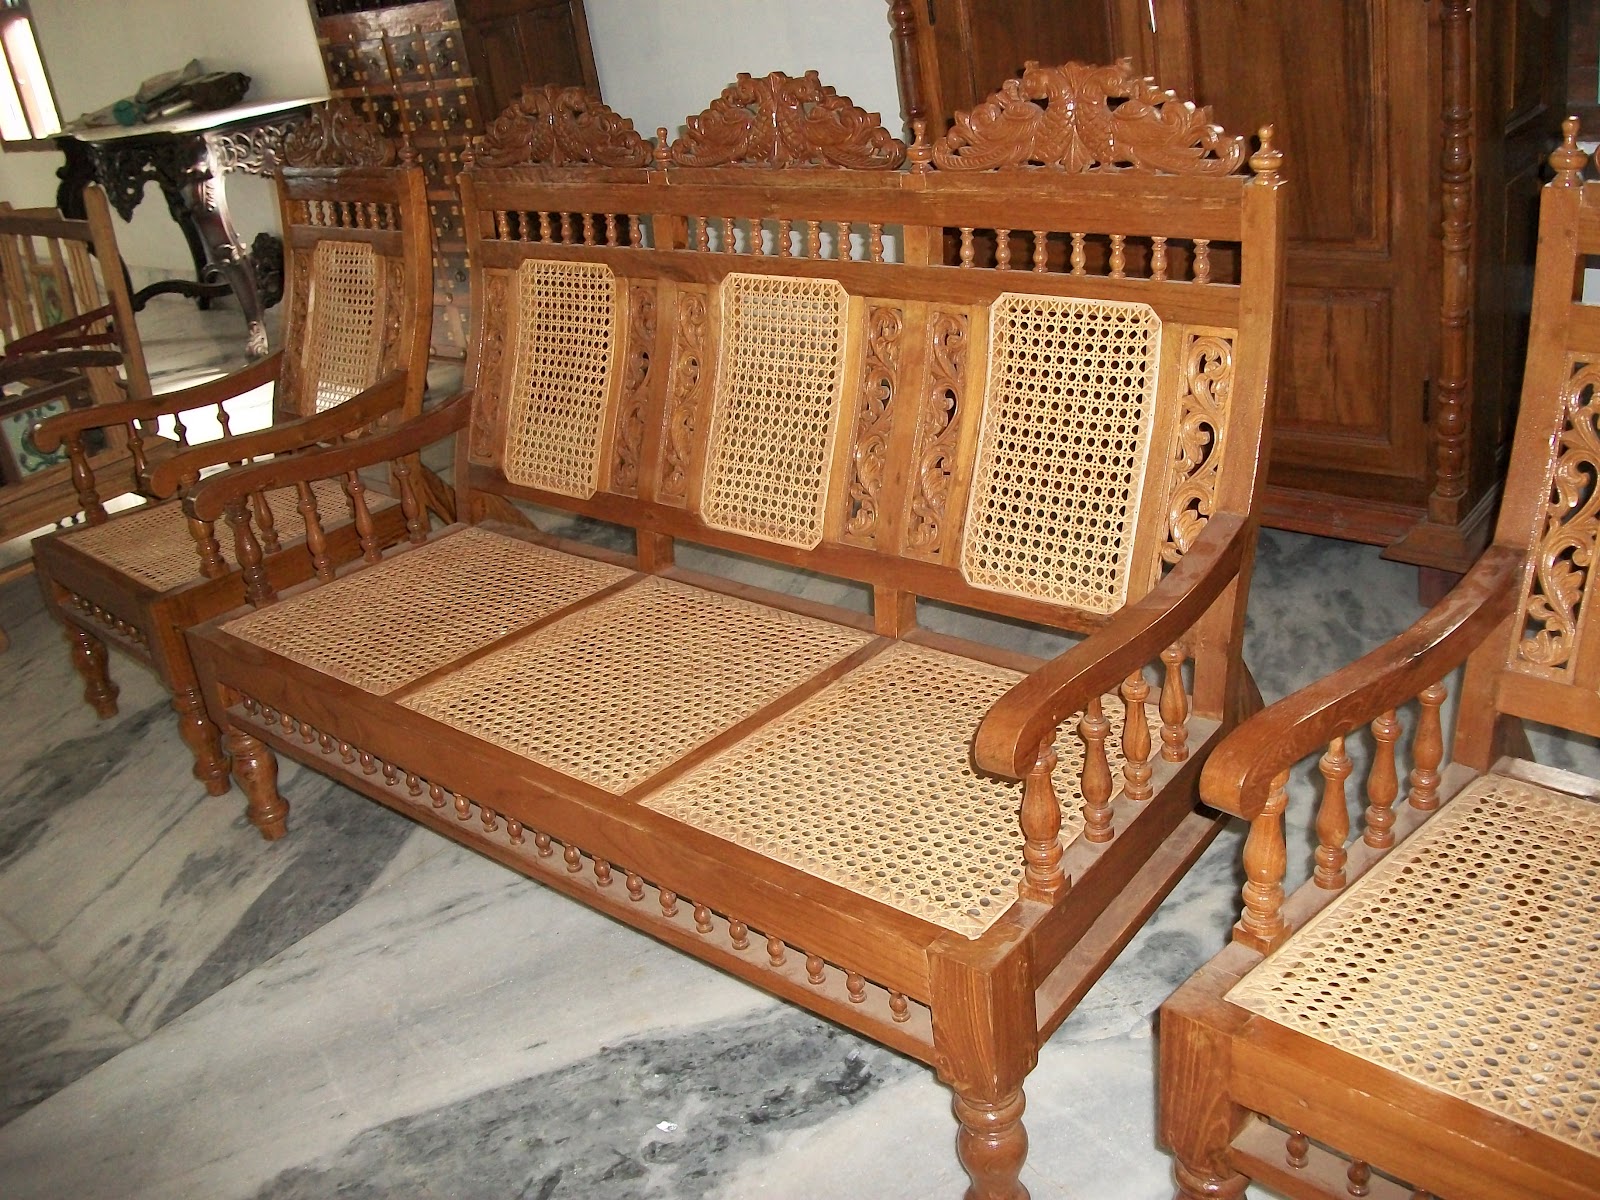 Why Choose A Teak Furniture Factory For Your Home Design Needs